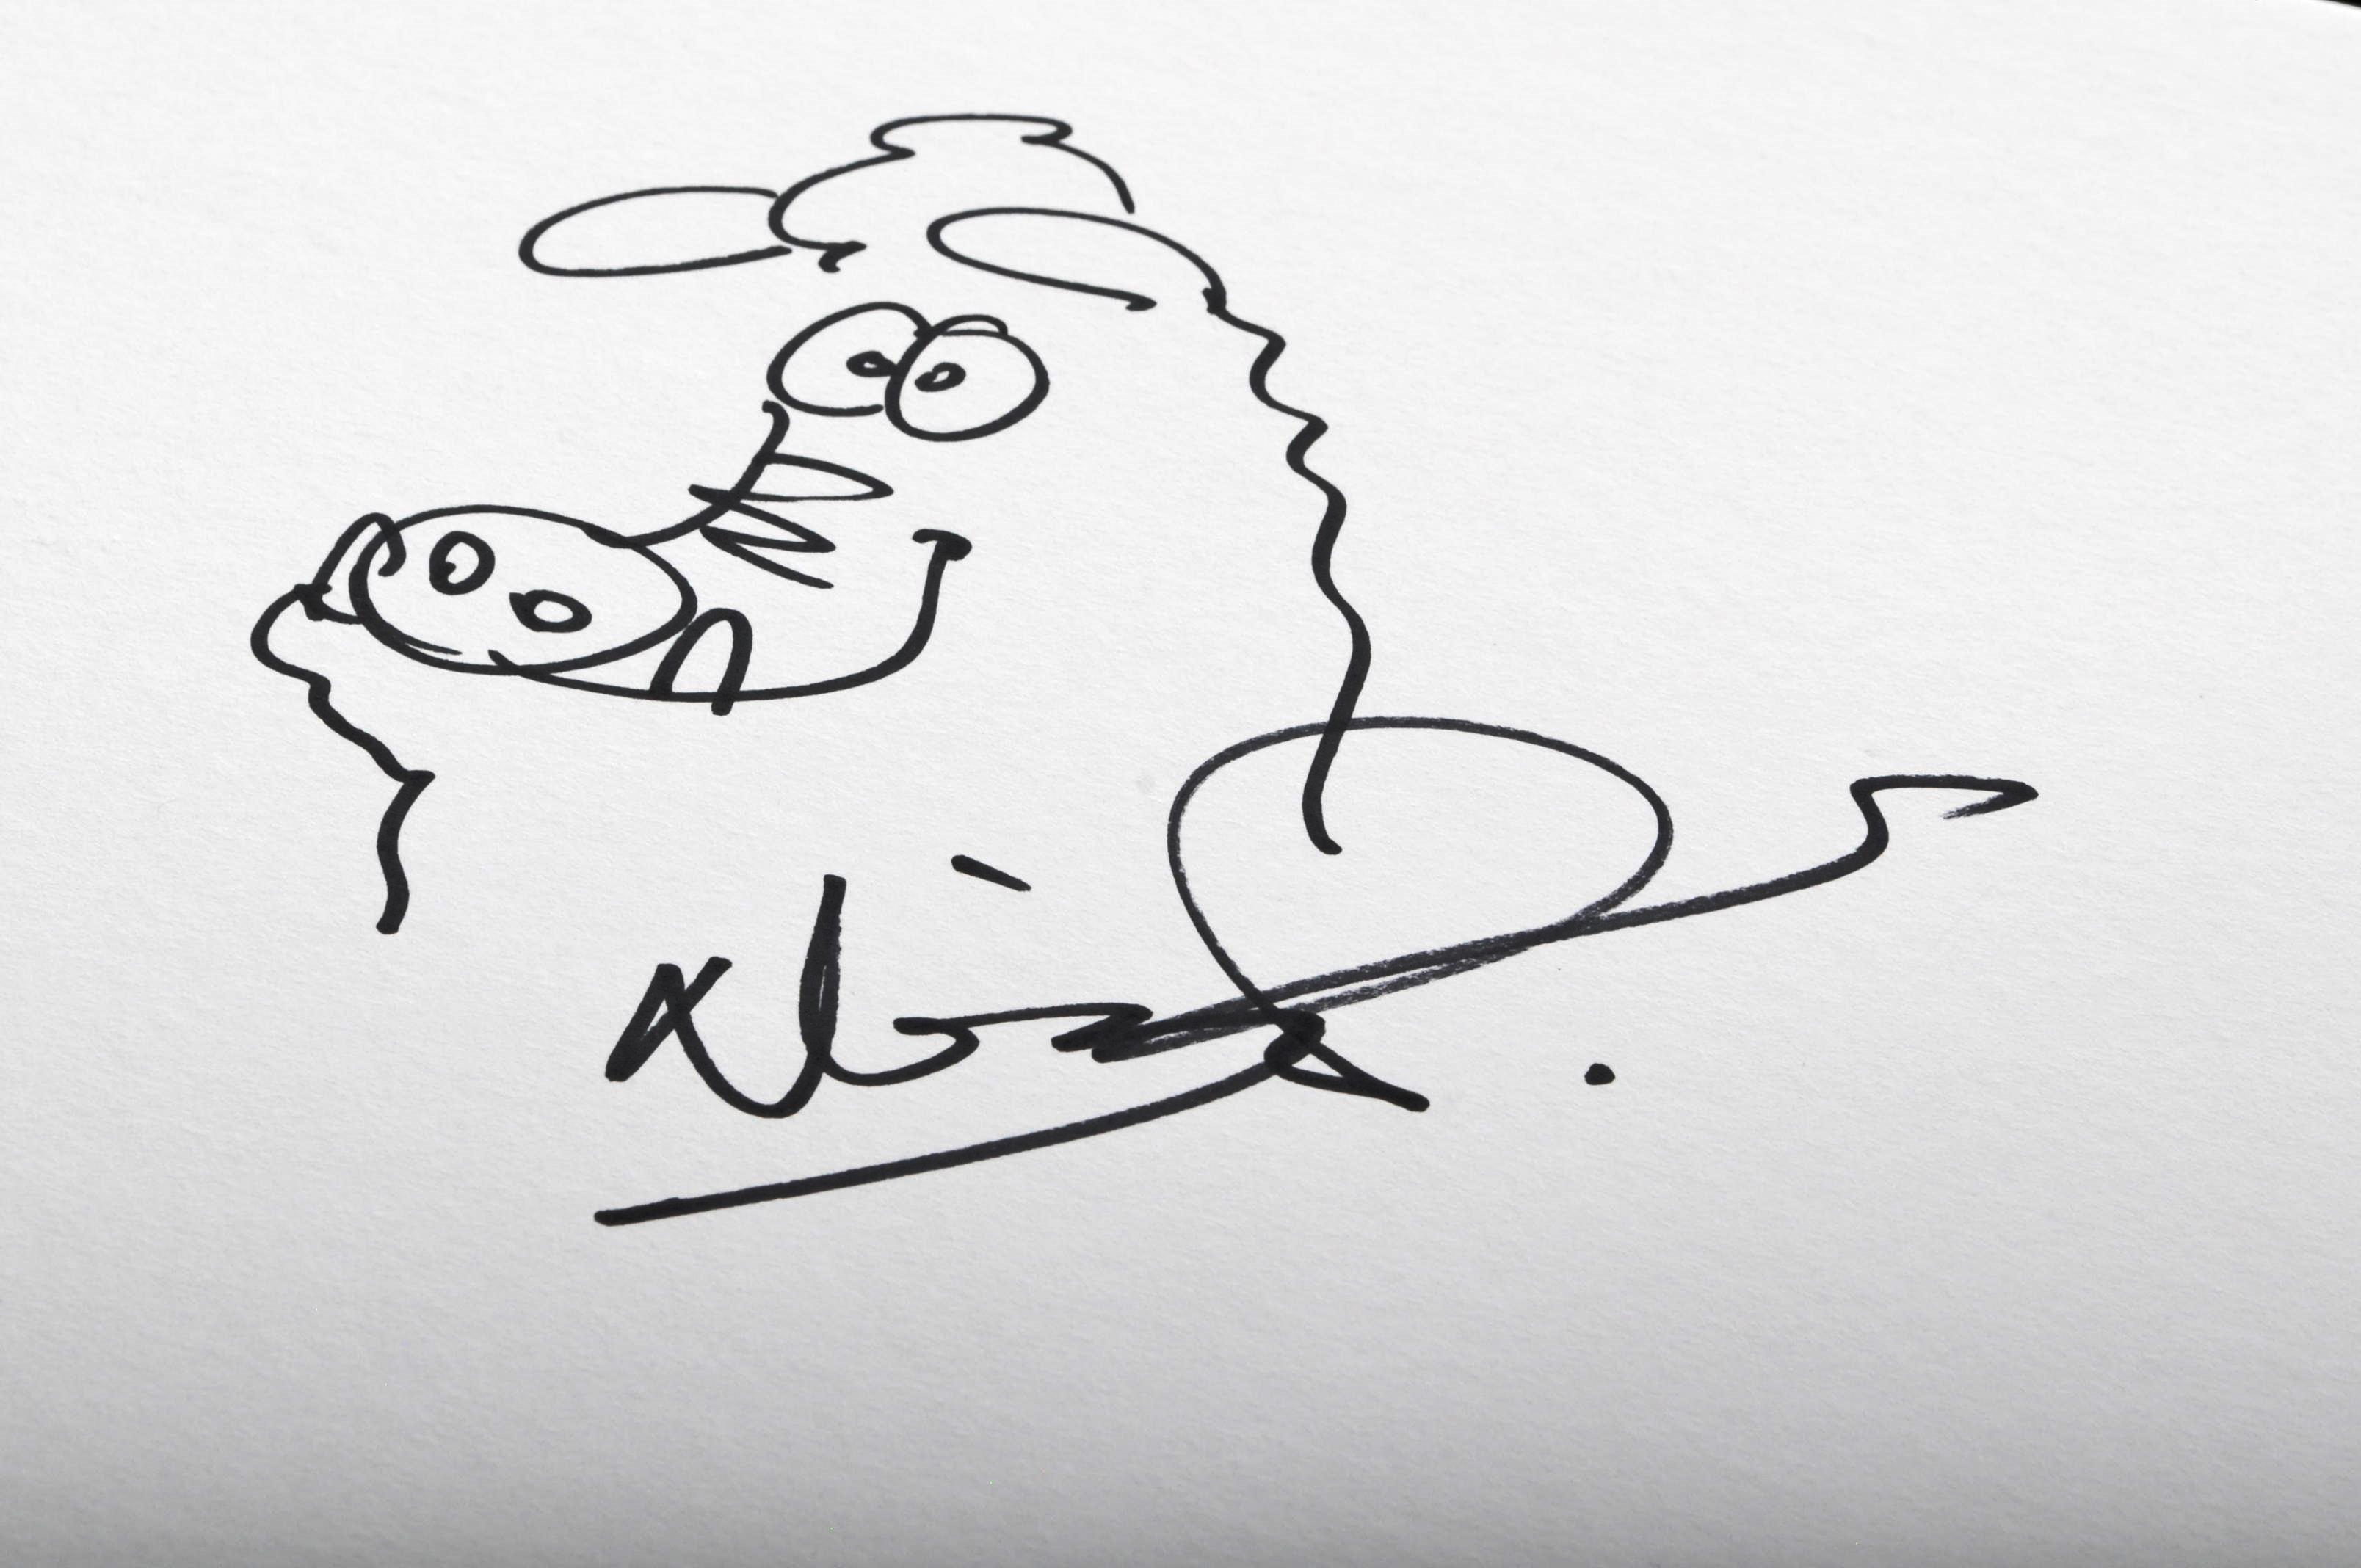 AARDMAN ANIMATIONS - NICK PARK - EARLY MAN - HAND DRAWN SKETCH - Image 2 of 2